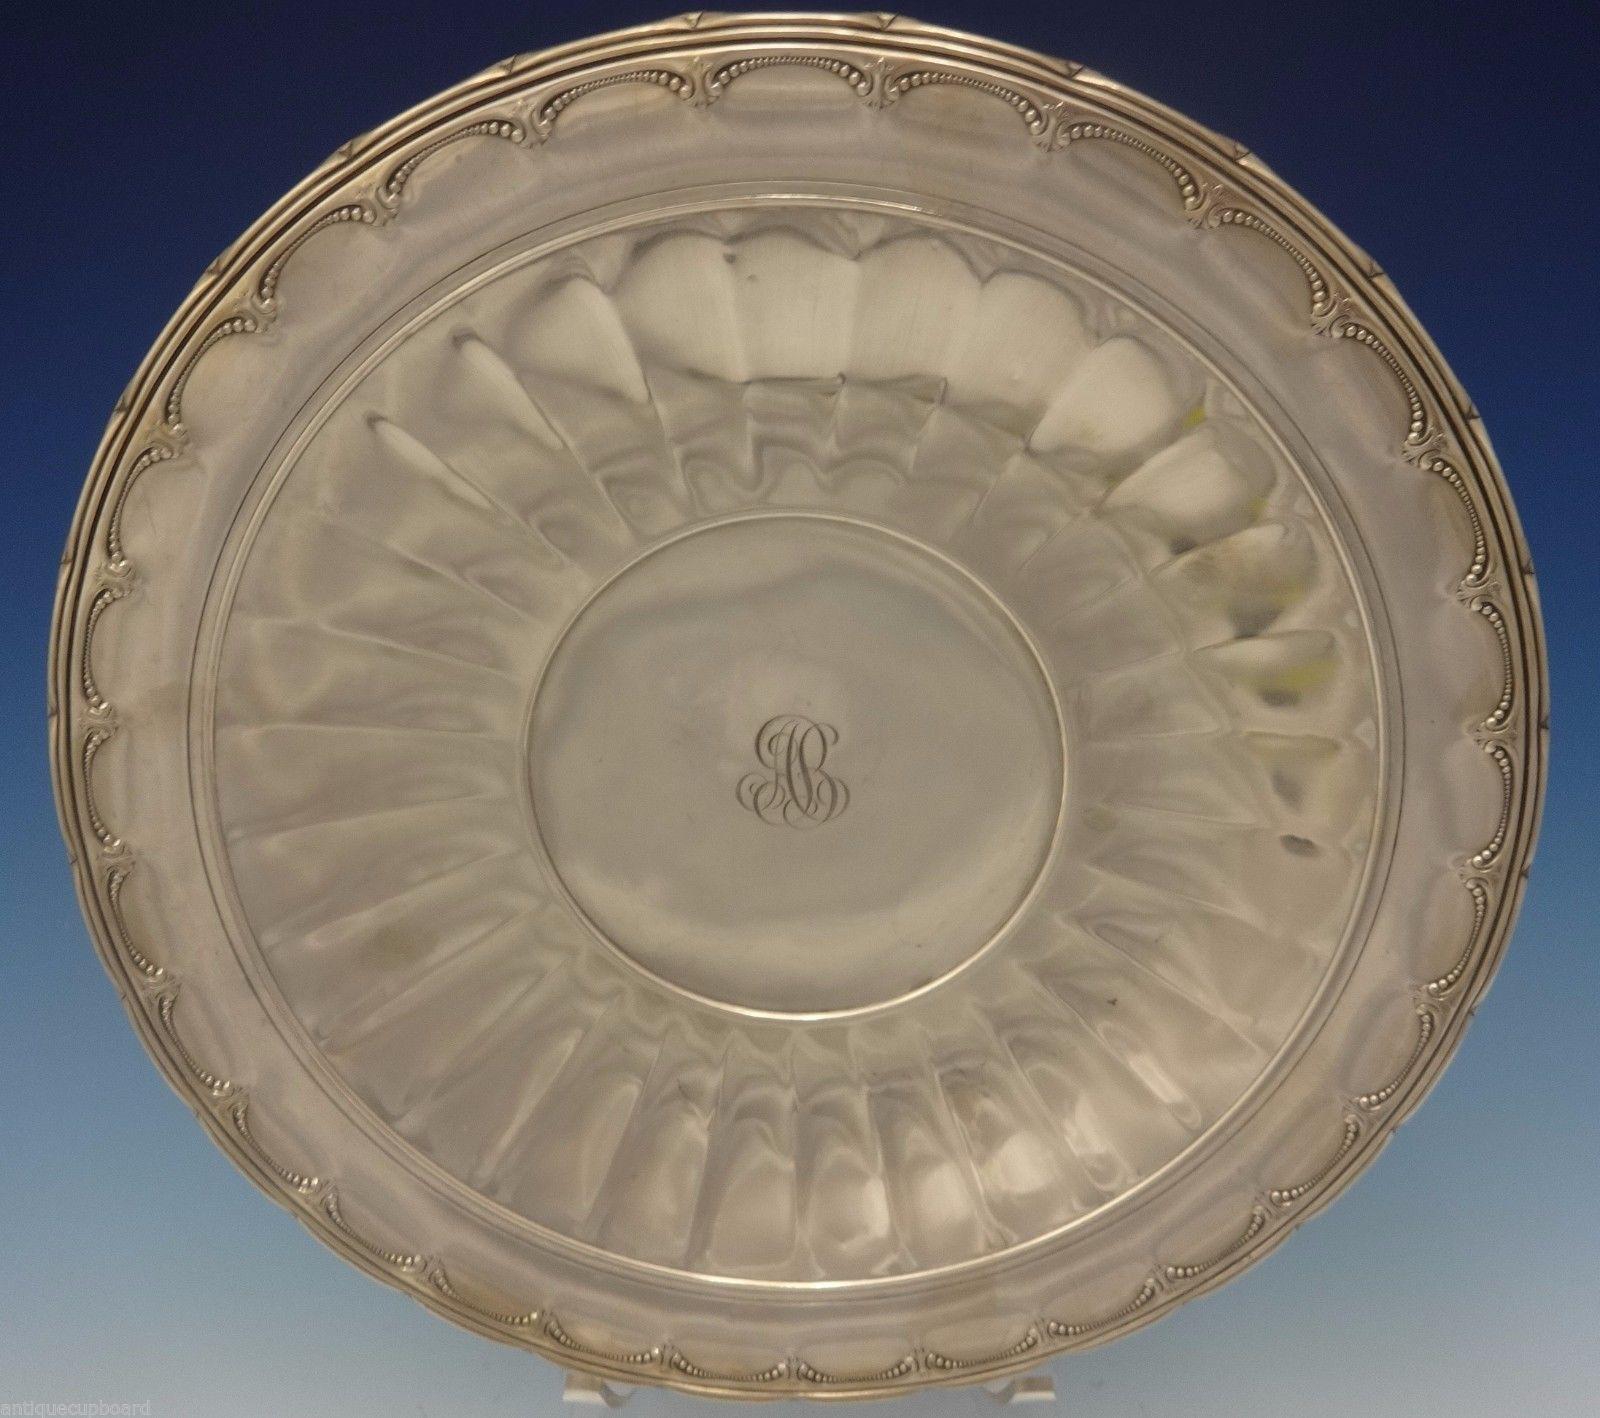 Old colonial by Towle
Lavishly decorated and representing the height of the silversmith’s craft, old colonial is a peerless expression of sophistication in sterling. Gorgeous Old Colonial by Towle sterling silver serving plate. It has an AB